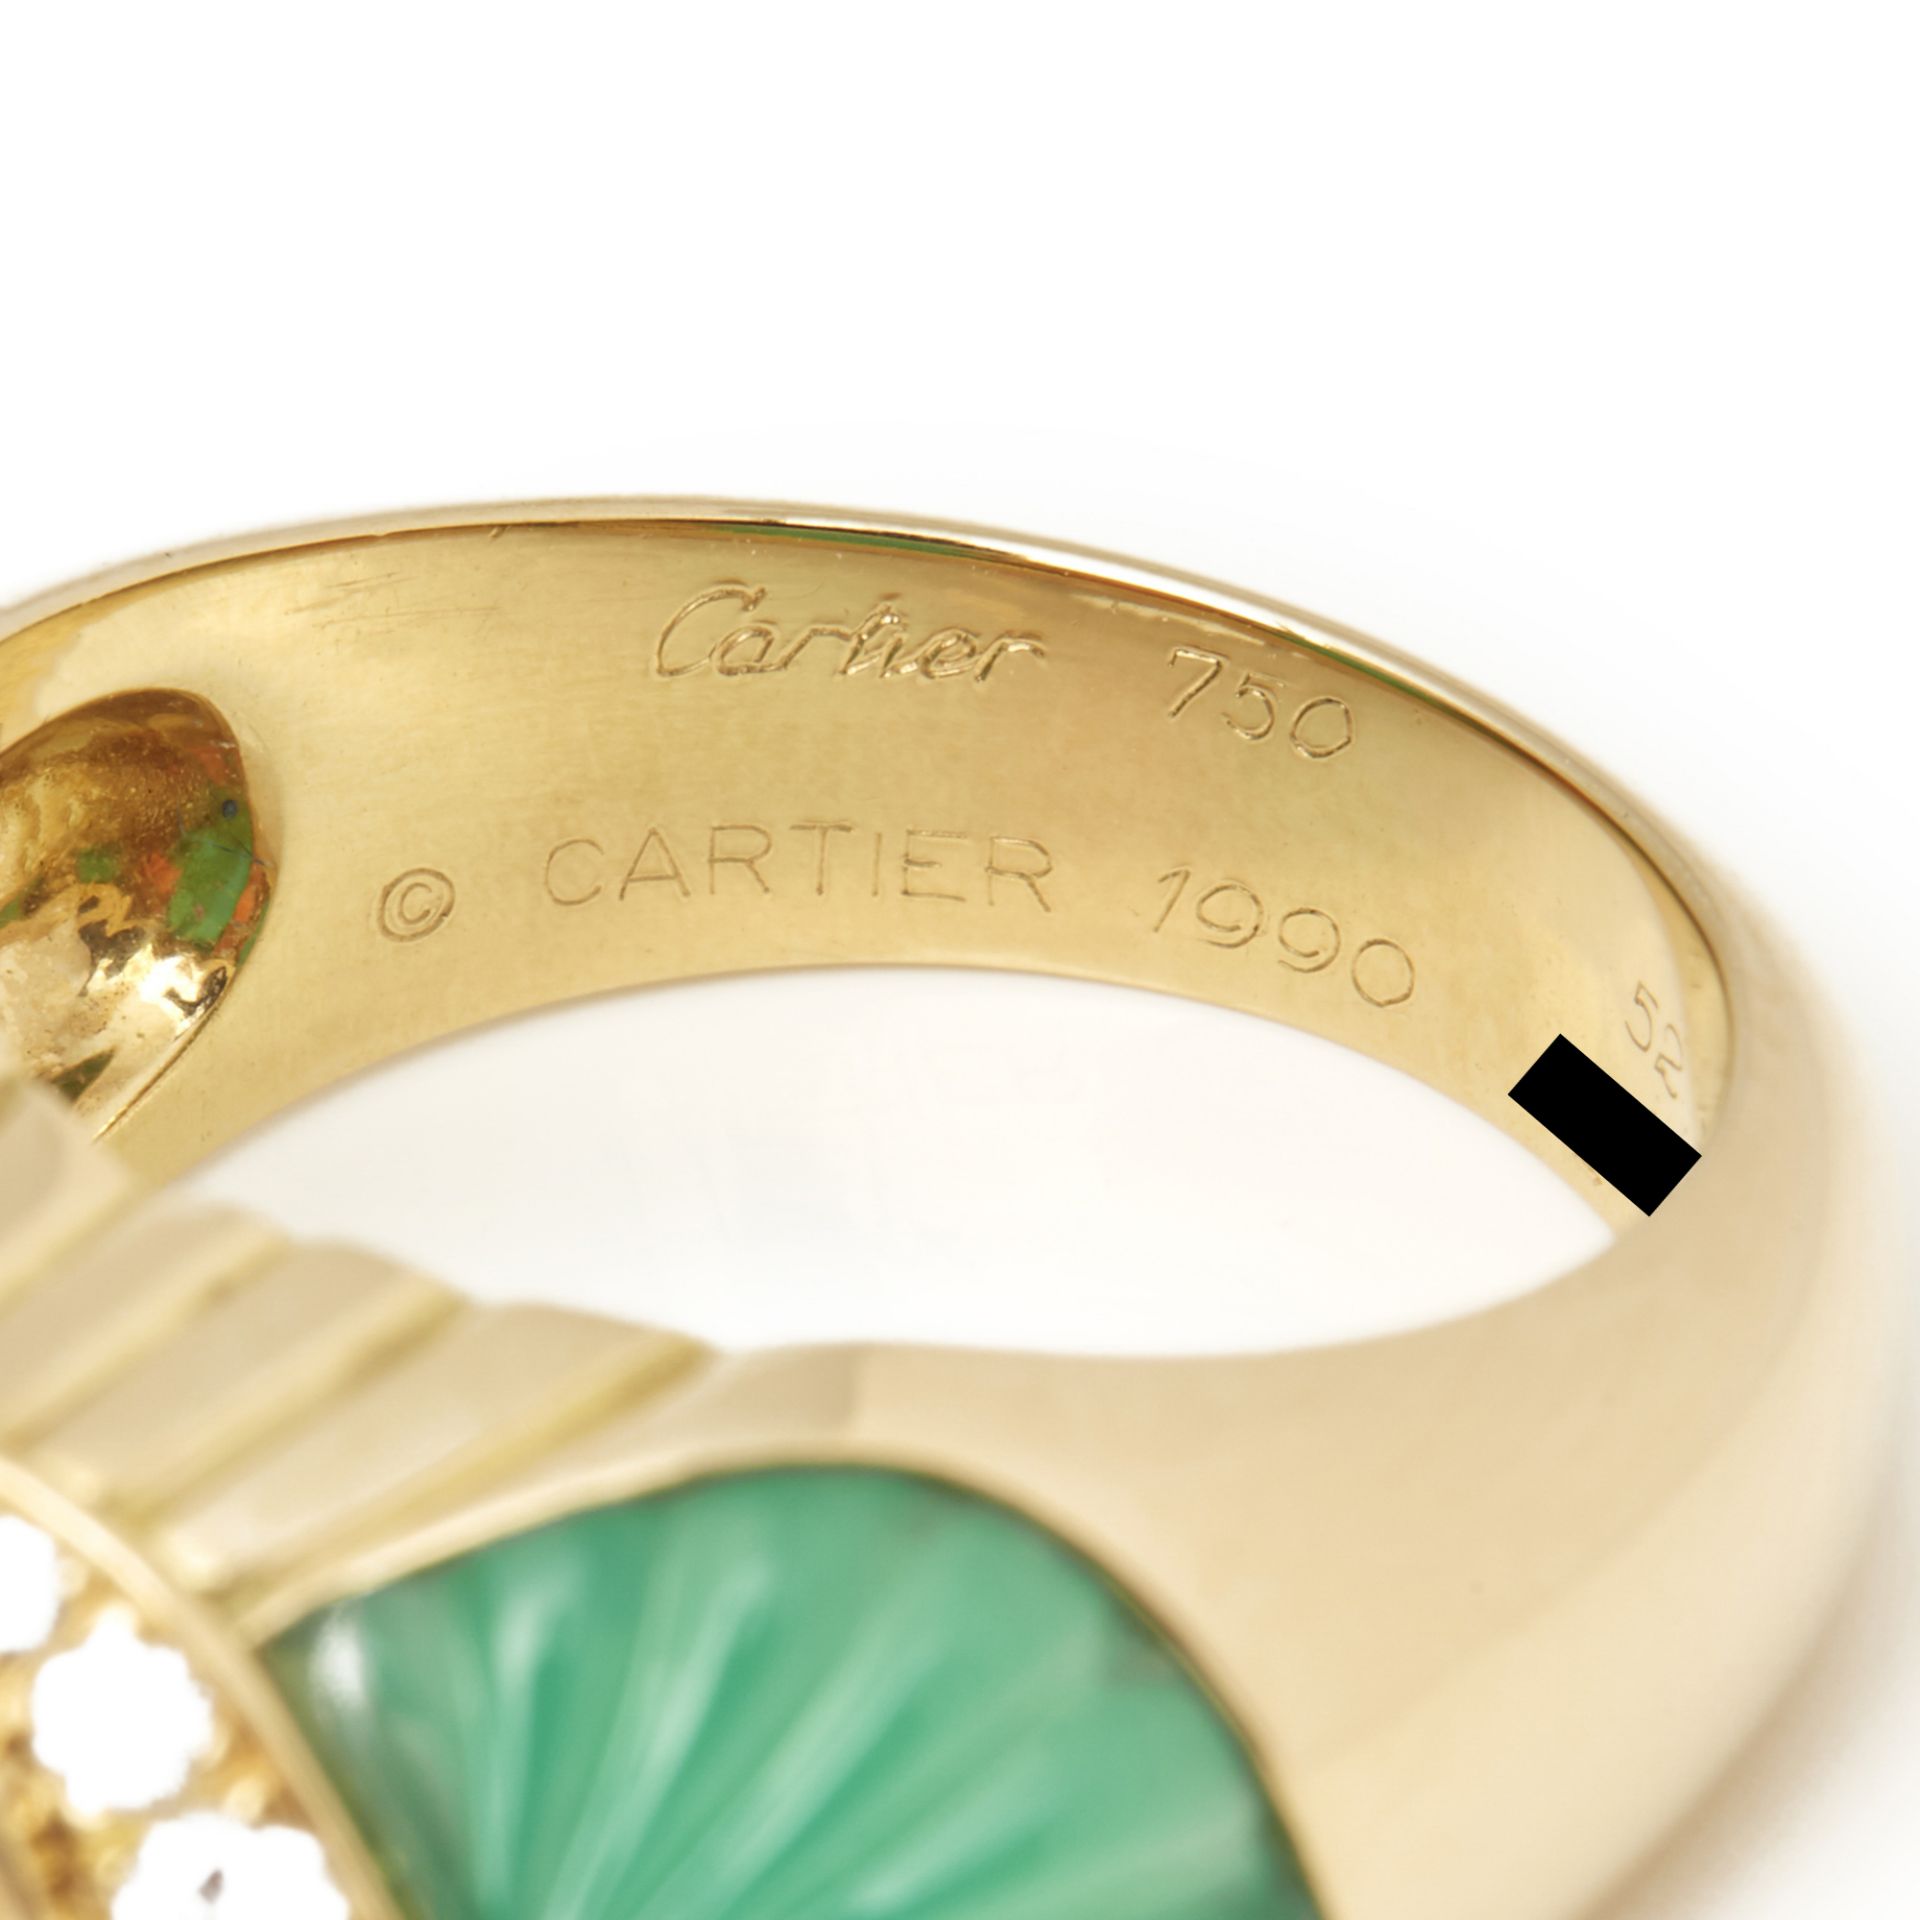 Cartier 18k Yellow Gold Chrysoprase, Coral & Diamond Ring - Image 2 of 7